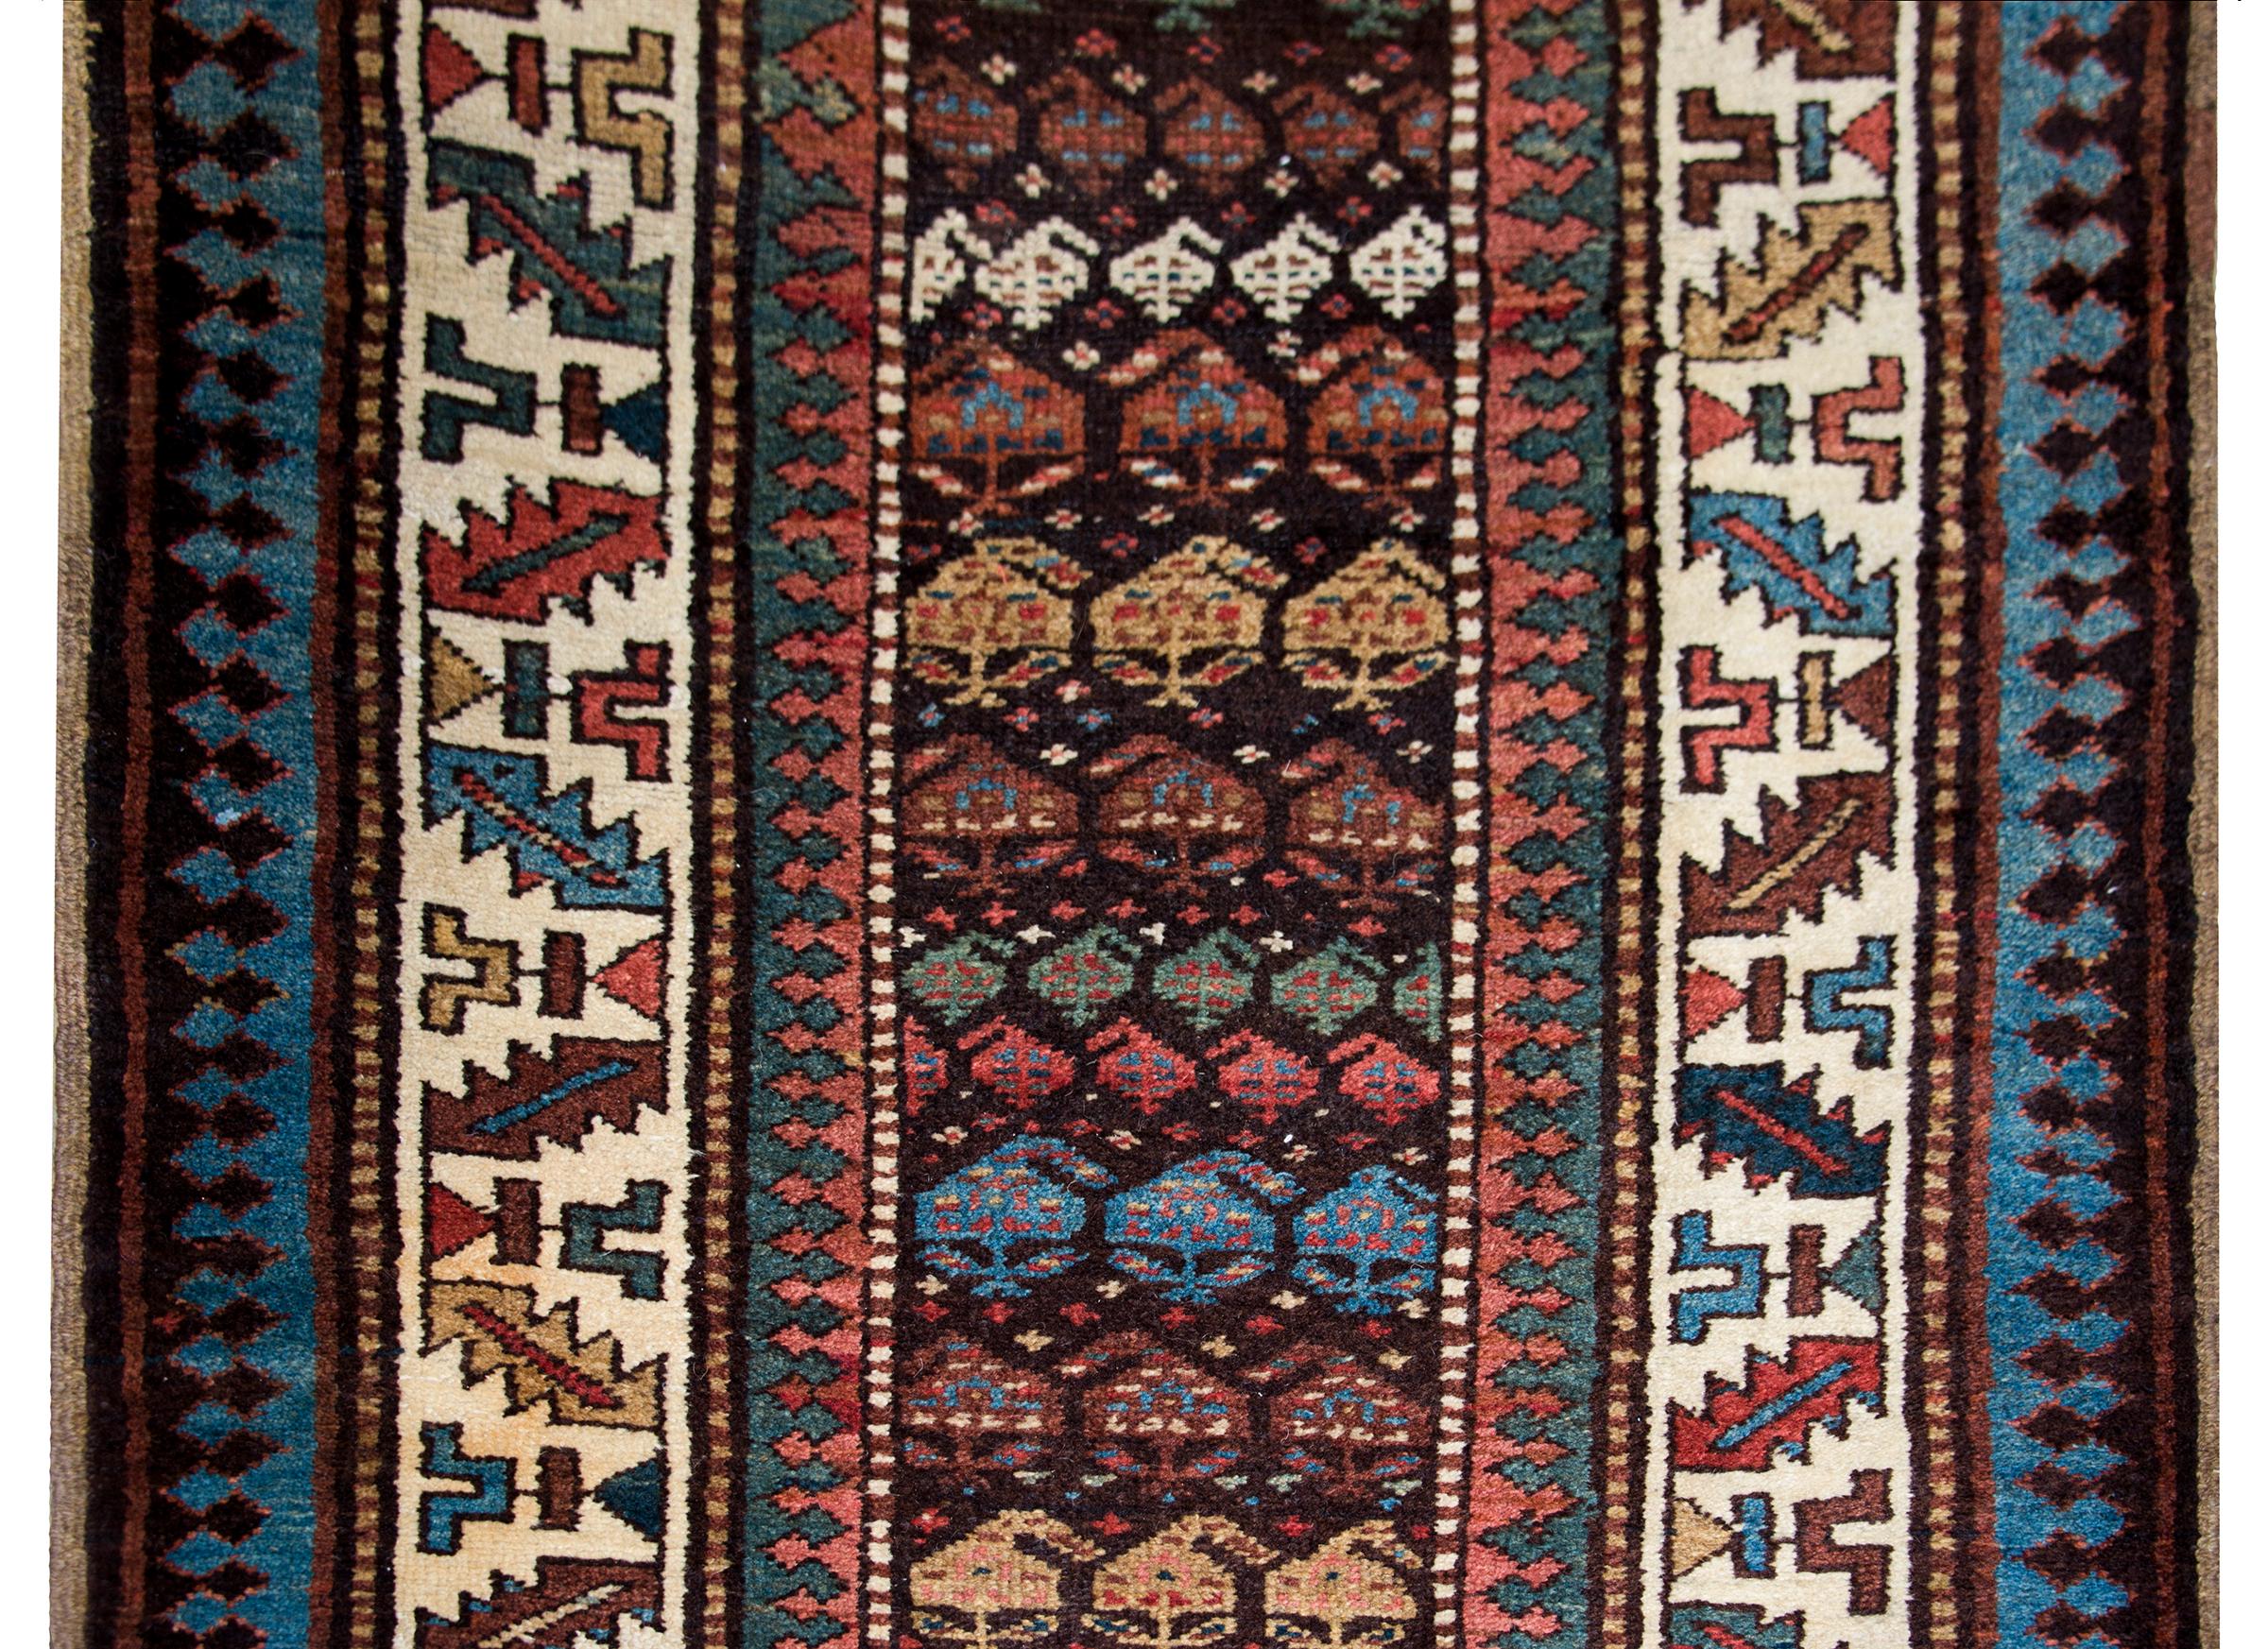 A stunning late 19th century Persian Kuba runner with the most beautiful all-over paisley pattern woven in myriad colors including indigo, crimson, yellow, green, and brown wool, surrounded by a border of multiple stylized floral and geometric